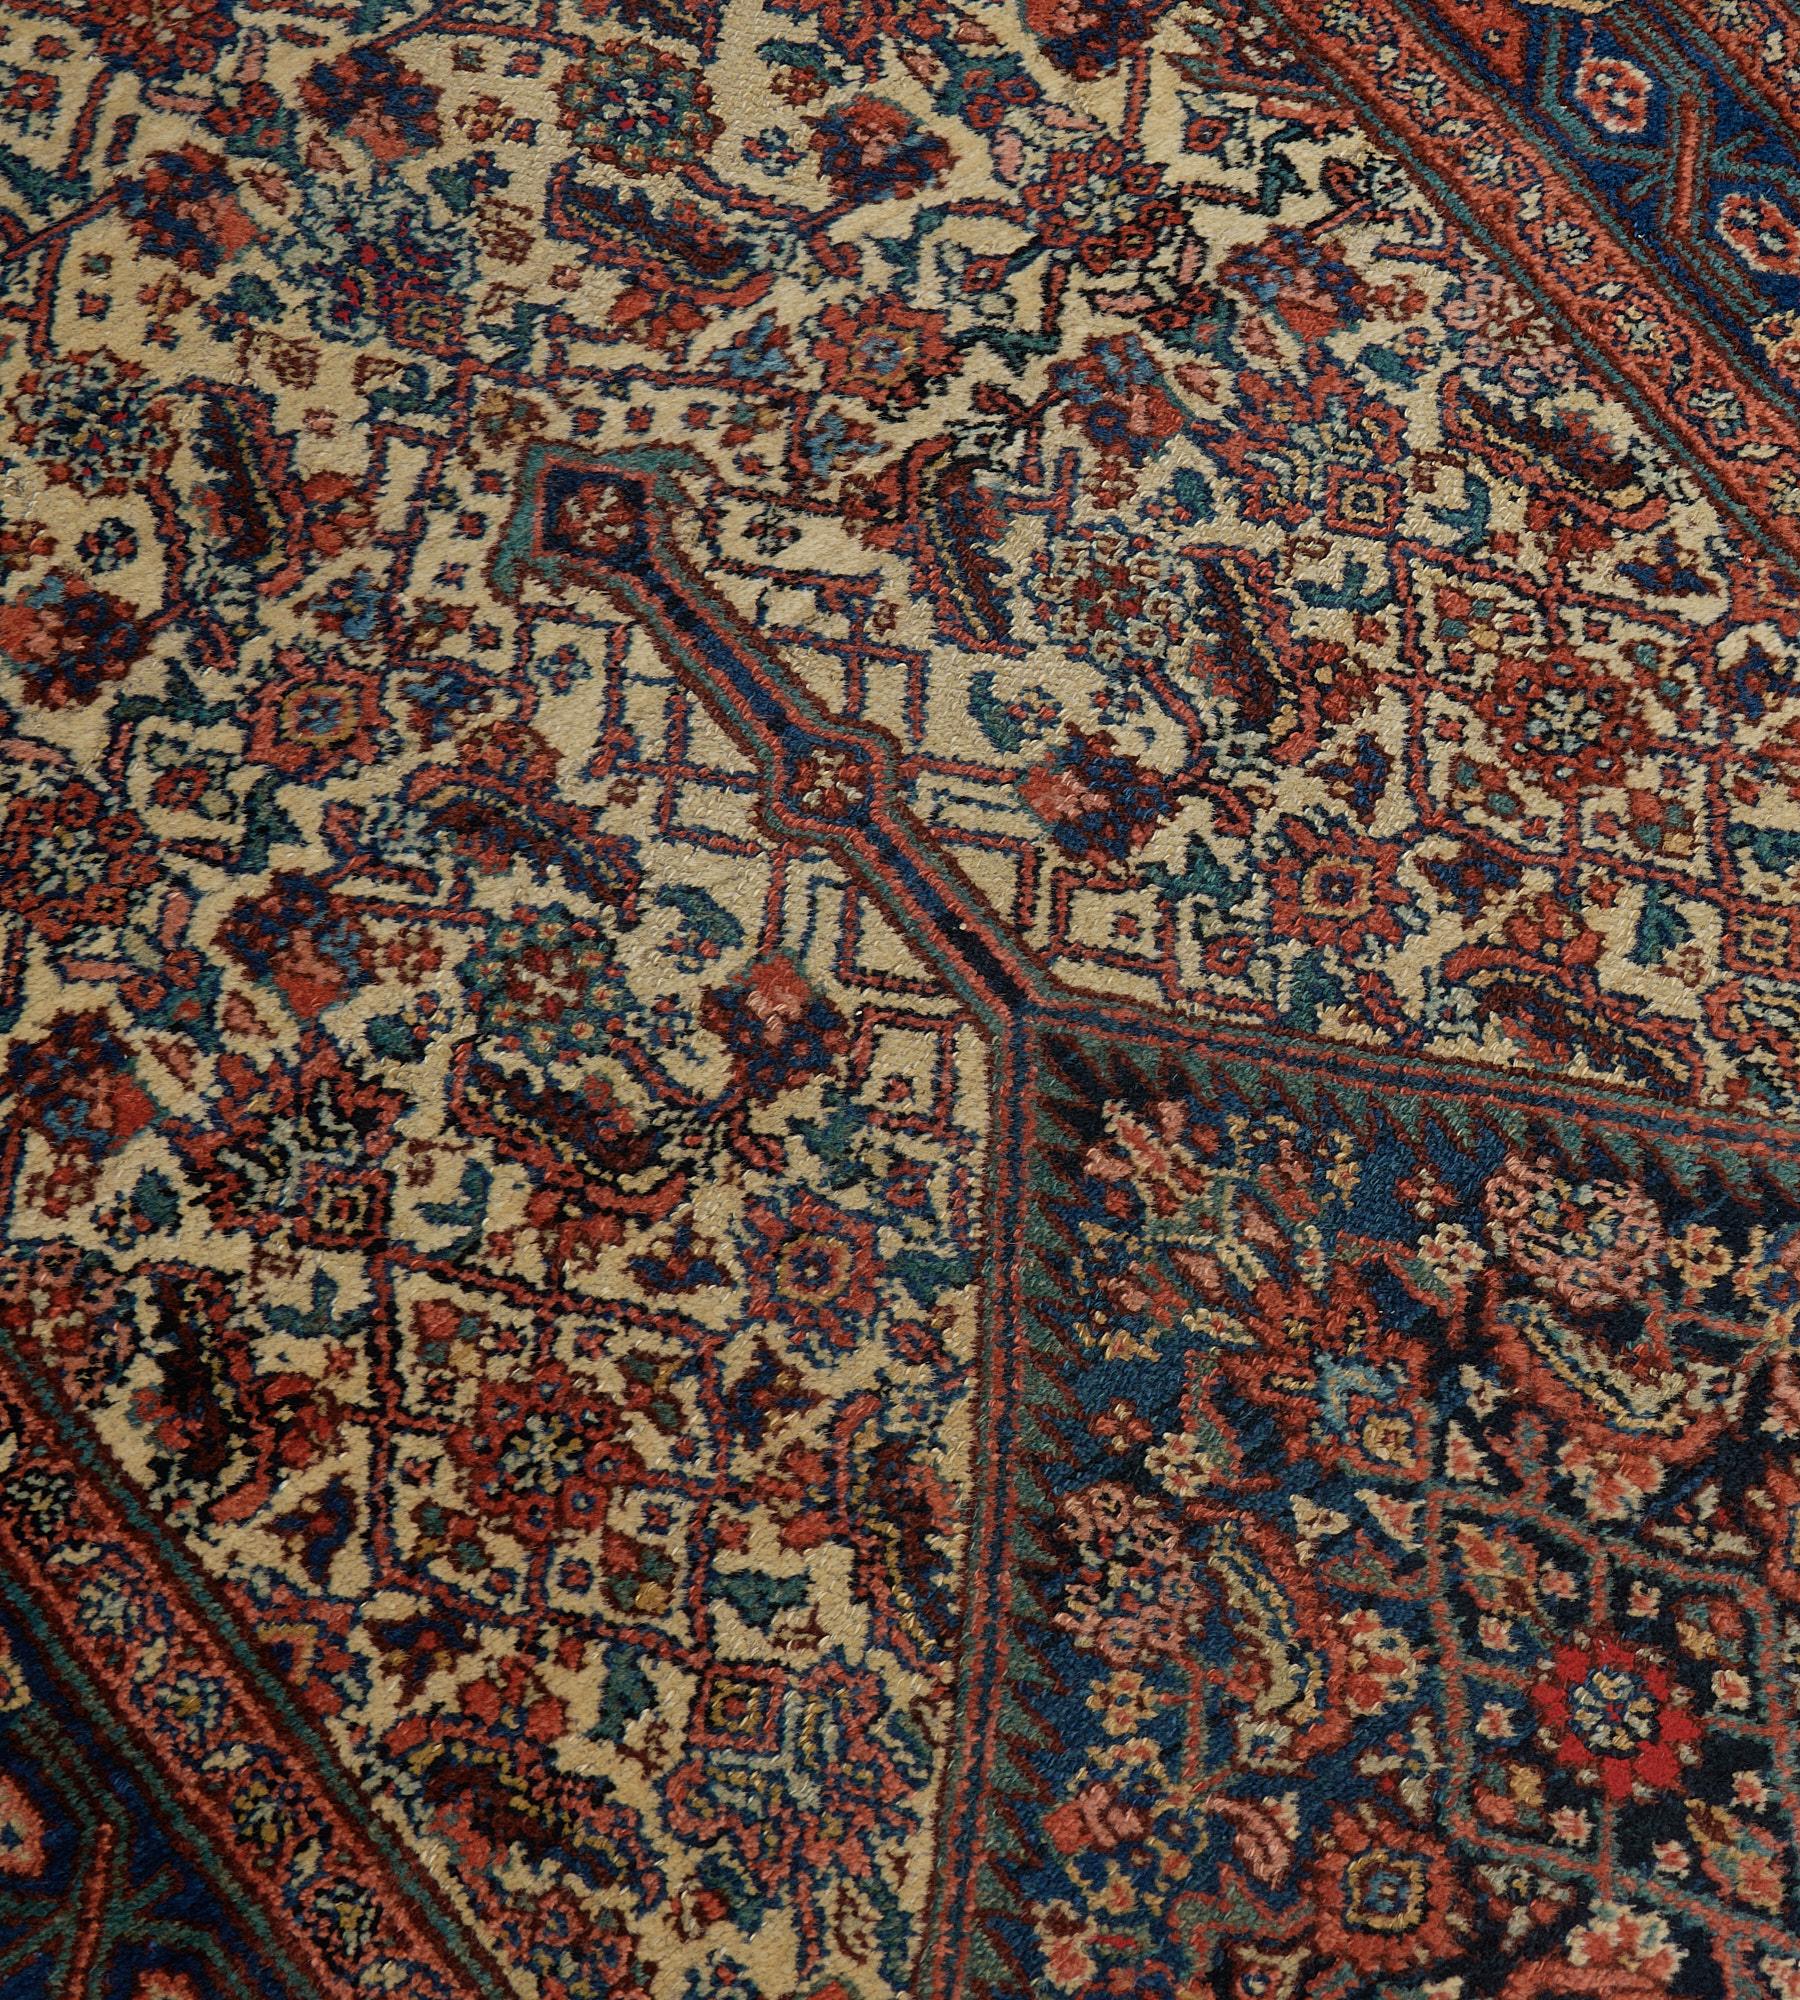 Authentic Antique Circa-1900 Handwoven Wool Persian Serab Runner In Good Condition For Sale In West Hollywood, CA